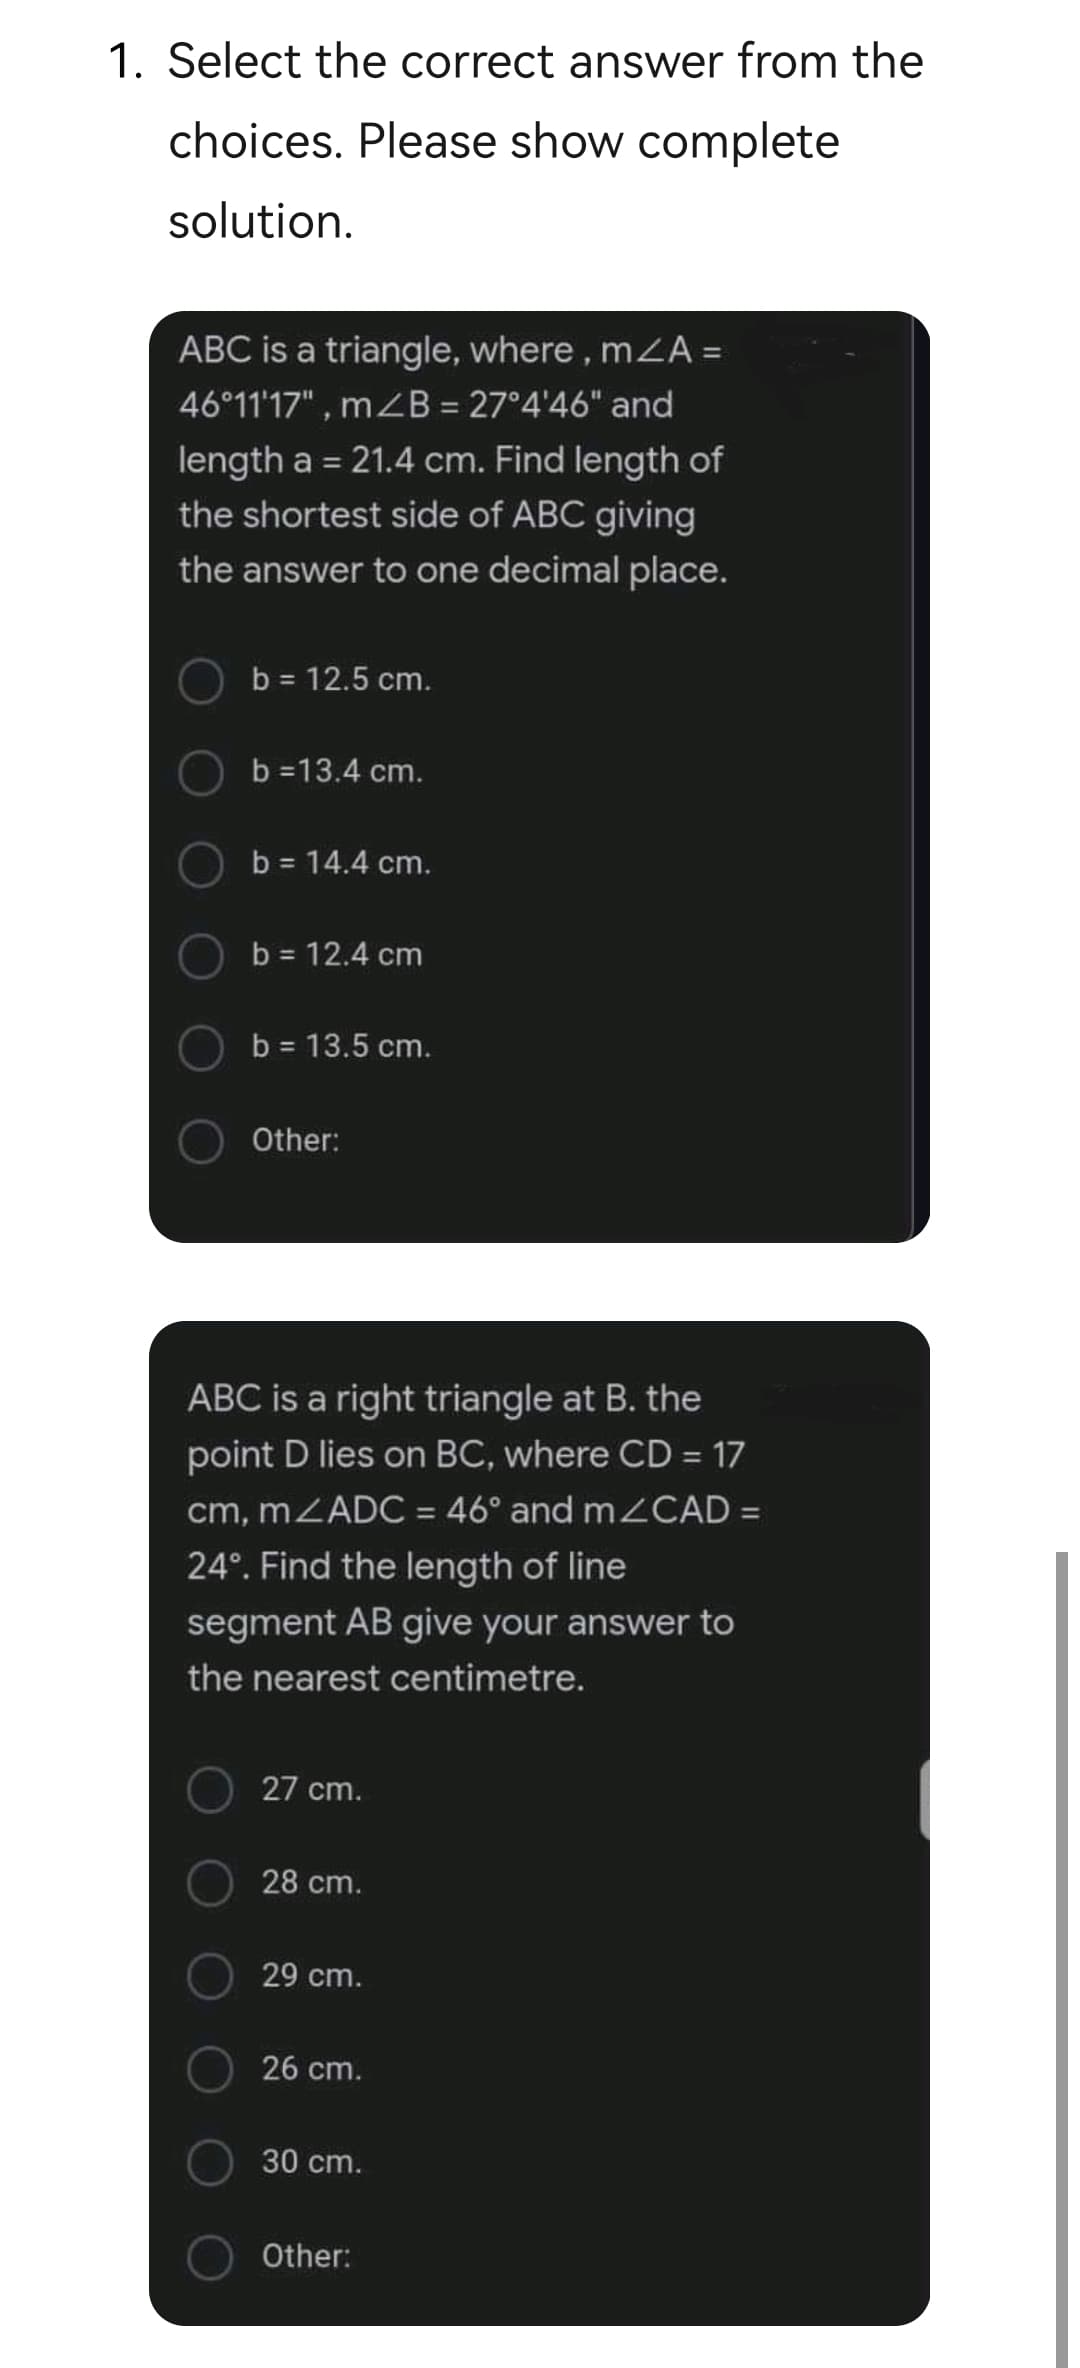 1. Select the correct answer from the
choices. Please show complete
solution.
ABC is a triangle, where, mZA =
46°11'17", mzB = 27°4'46" and
length a = 21.4 cm. Find length of
the shortest side of ABC giving
%3D
the answer to one decimal place.
b = 12.5 cm.
b =13.4 cm.
b = 14.4 cm.
b = 12.4 cm
b = 13.5 cm.
Other:
ABC is a right triangle at B. the
point D lies on BC, where CD = 17
cm, MZADC = 46° and m CAD =
24°. Find the length of line
segment AB give your answer to
the nearest centimetre.
27 cm.
28 cm.
29 cm.
26 cm.
30 cm.
Other:
